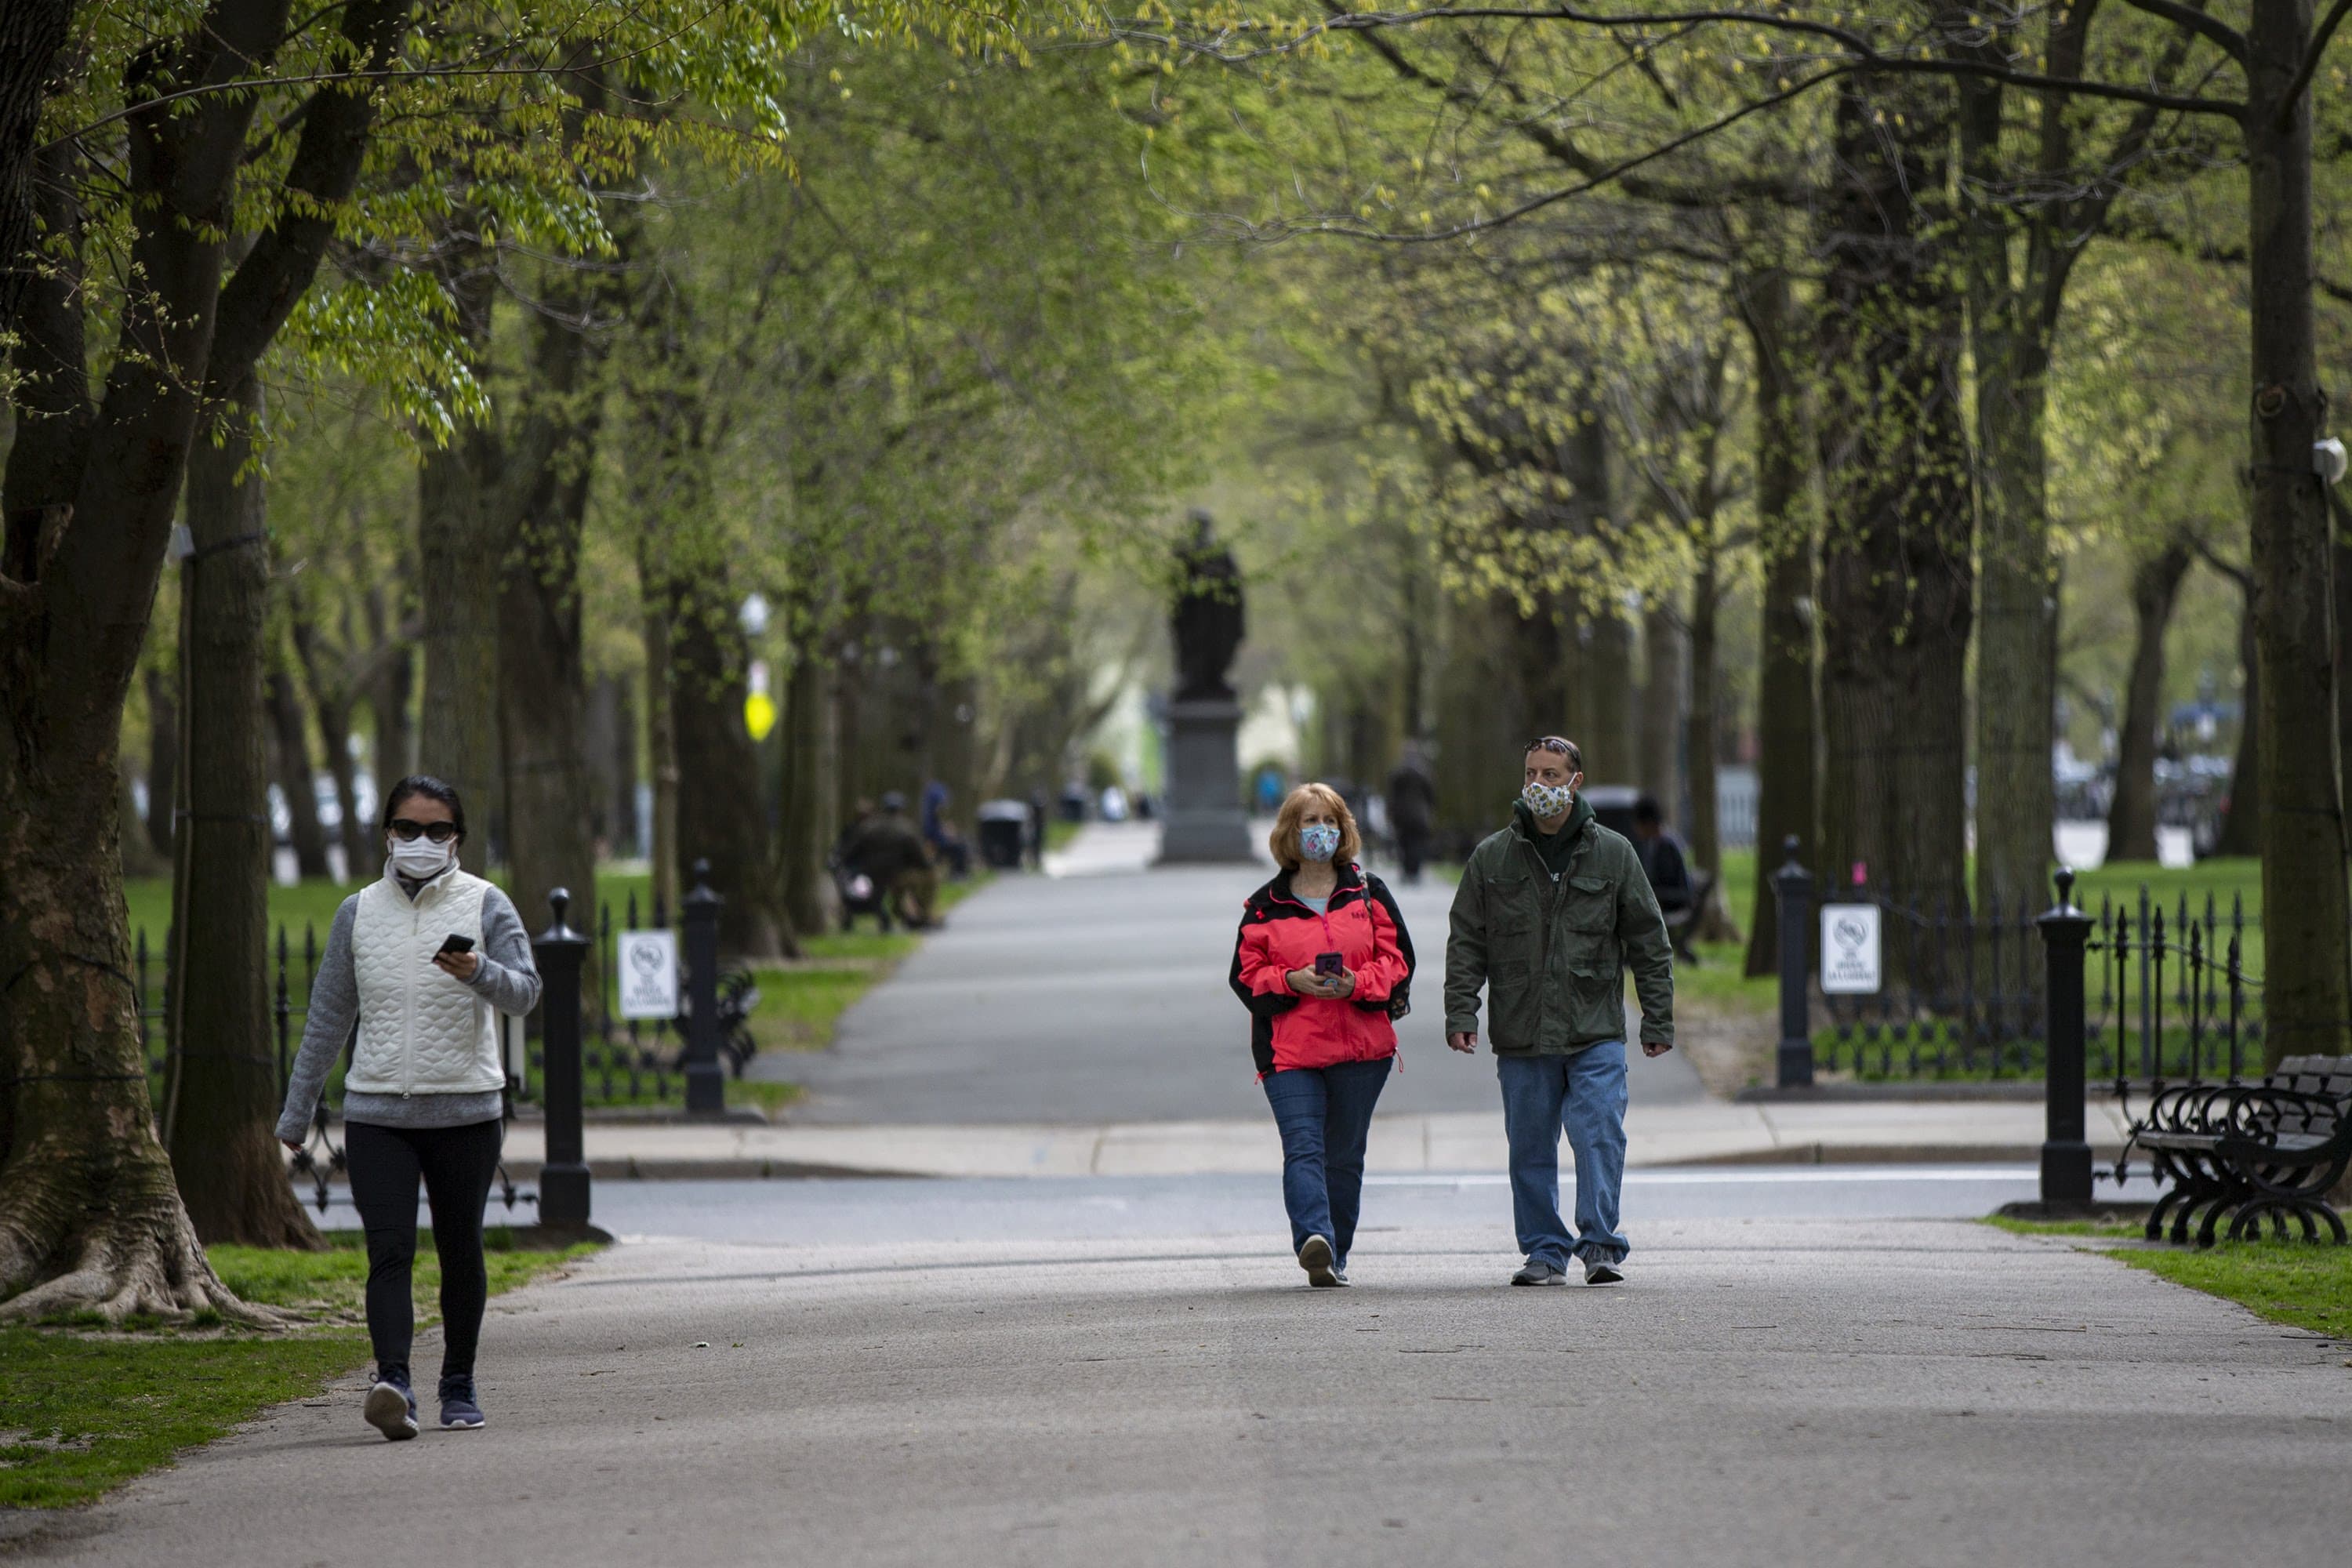 People walk along the Commonwealth Mall on the first day masks are required to be worn in the state. (Jesse Costa/WBUR)